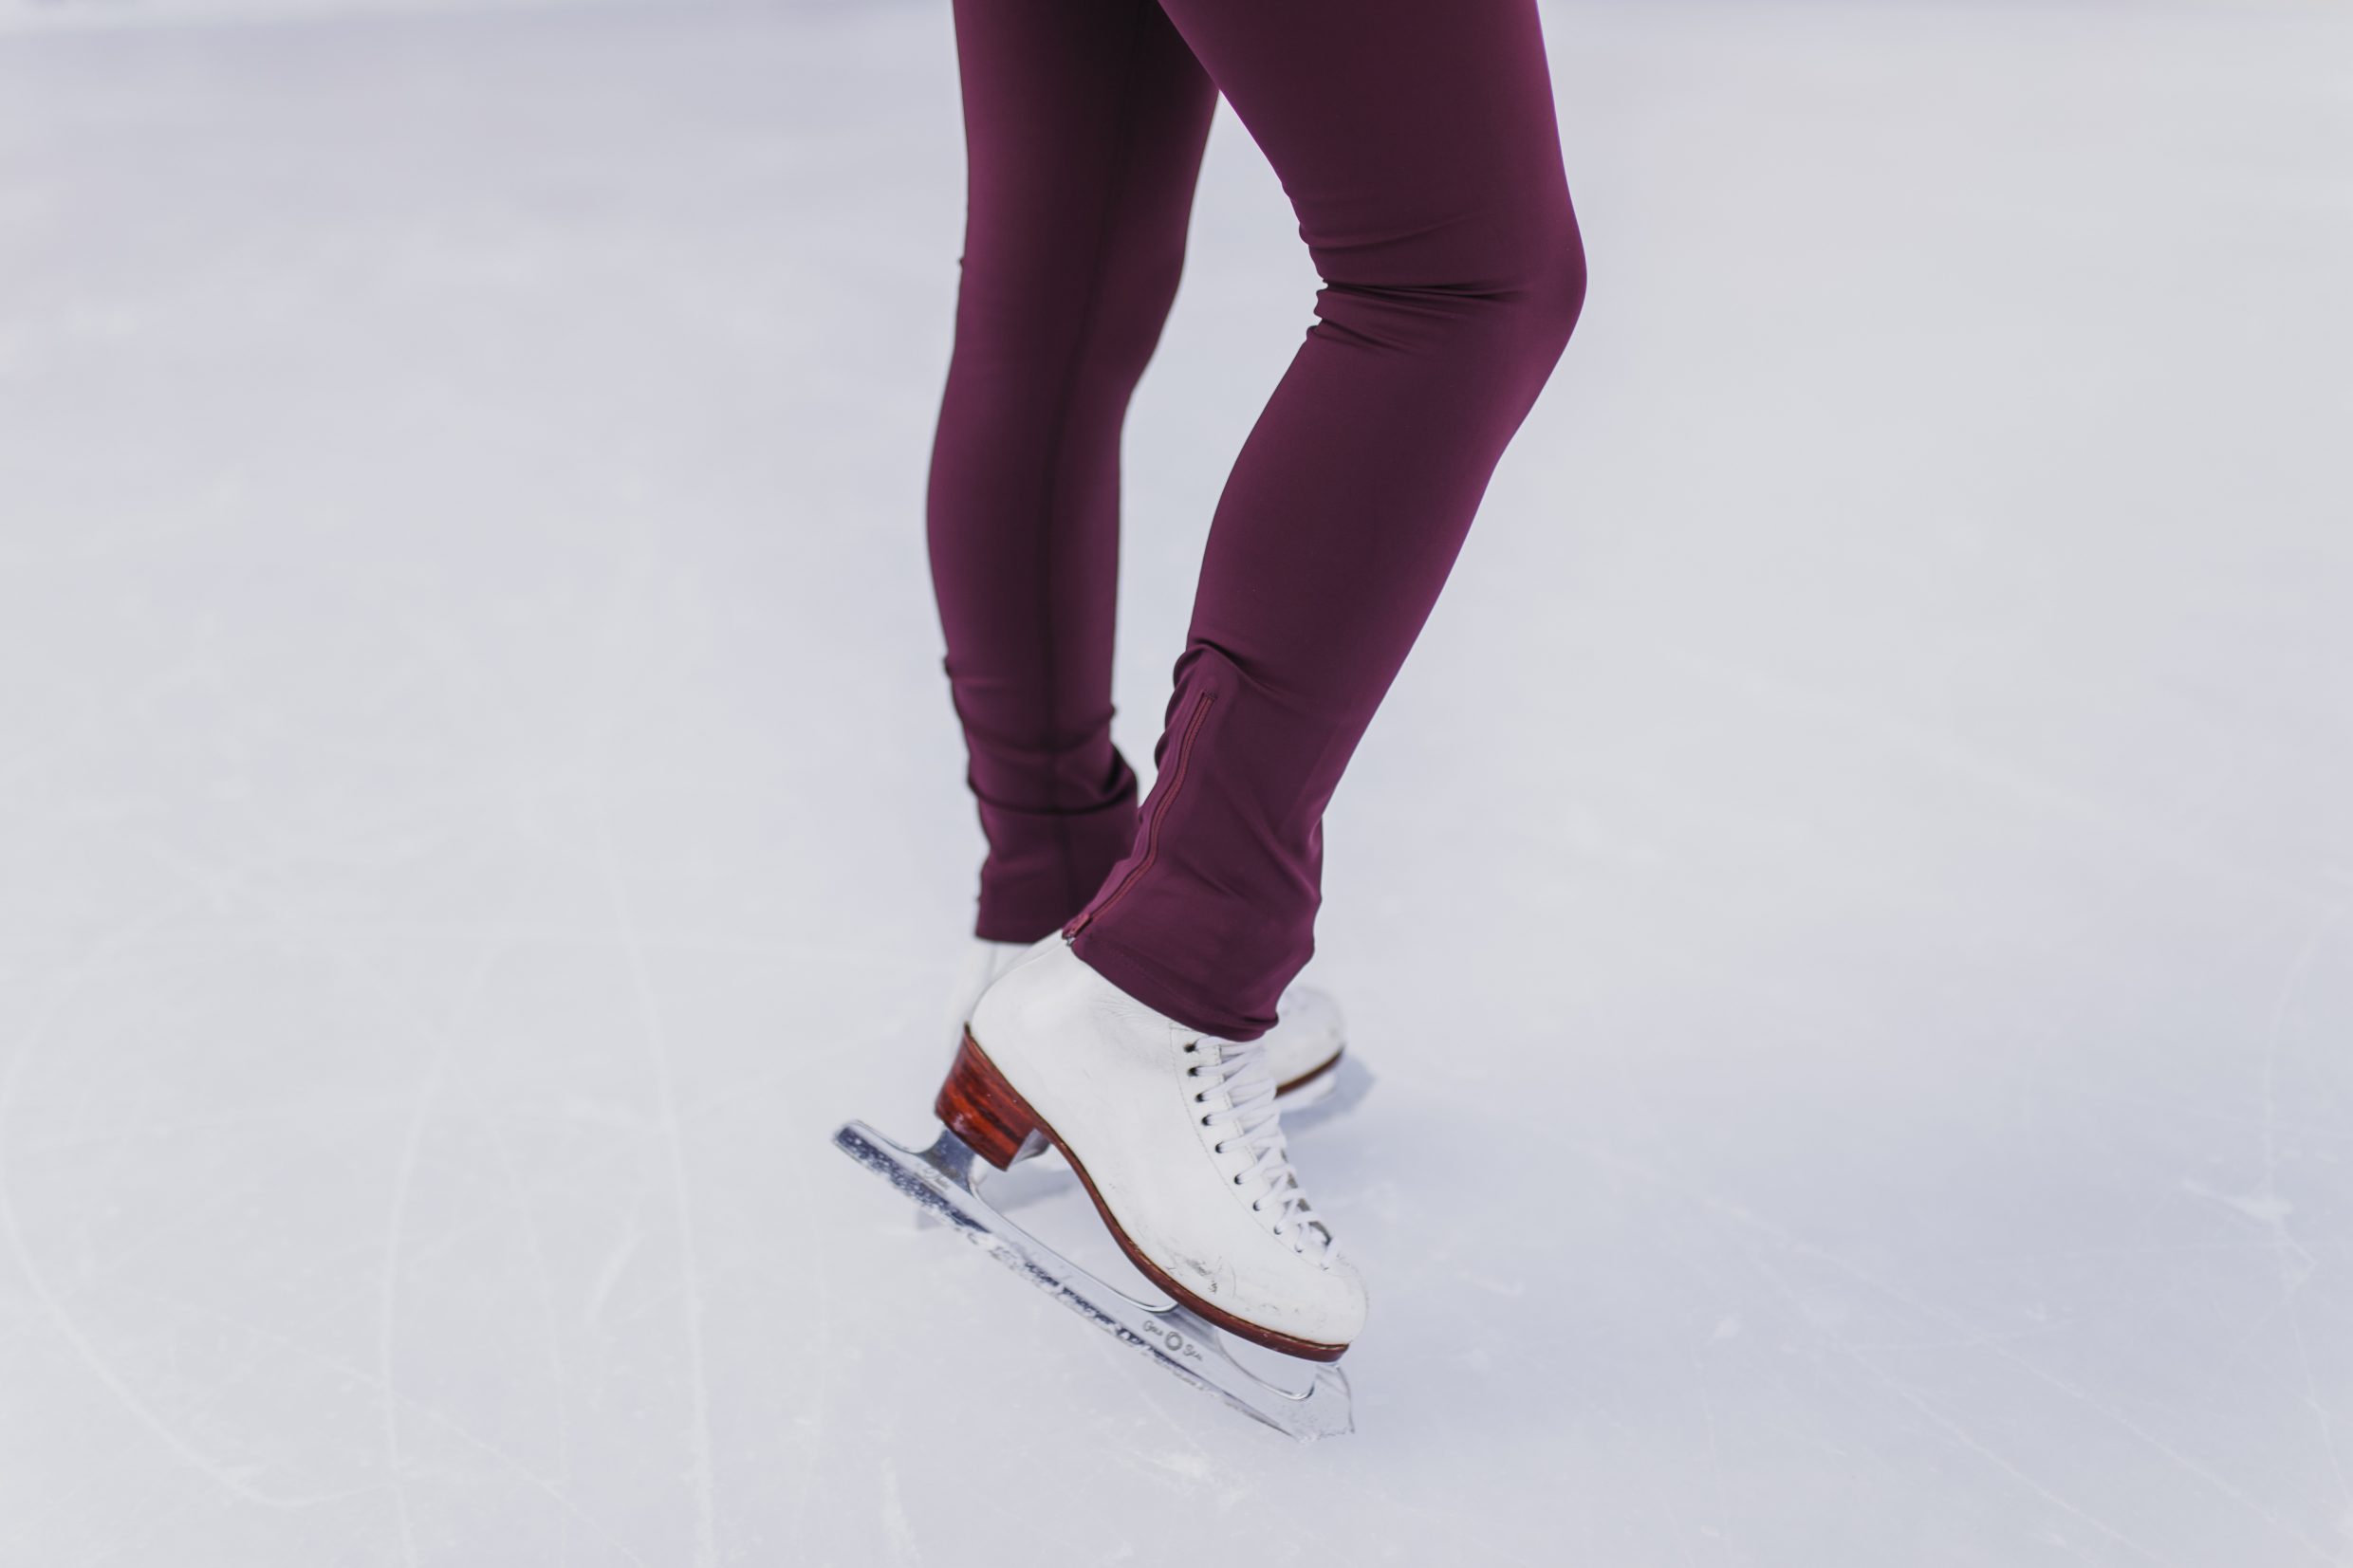 Burgundy thermal spring leggings for stay active including figure skating